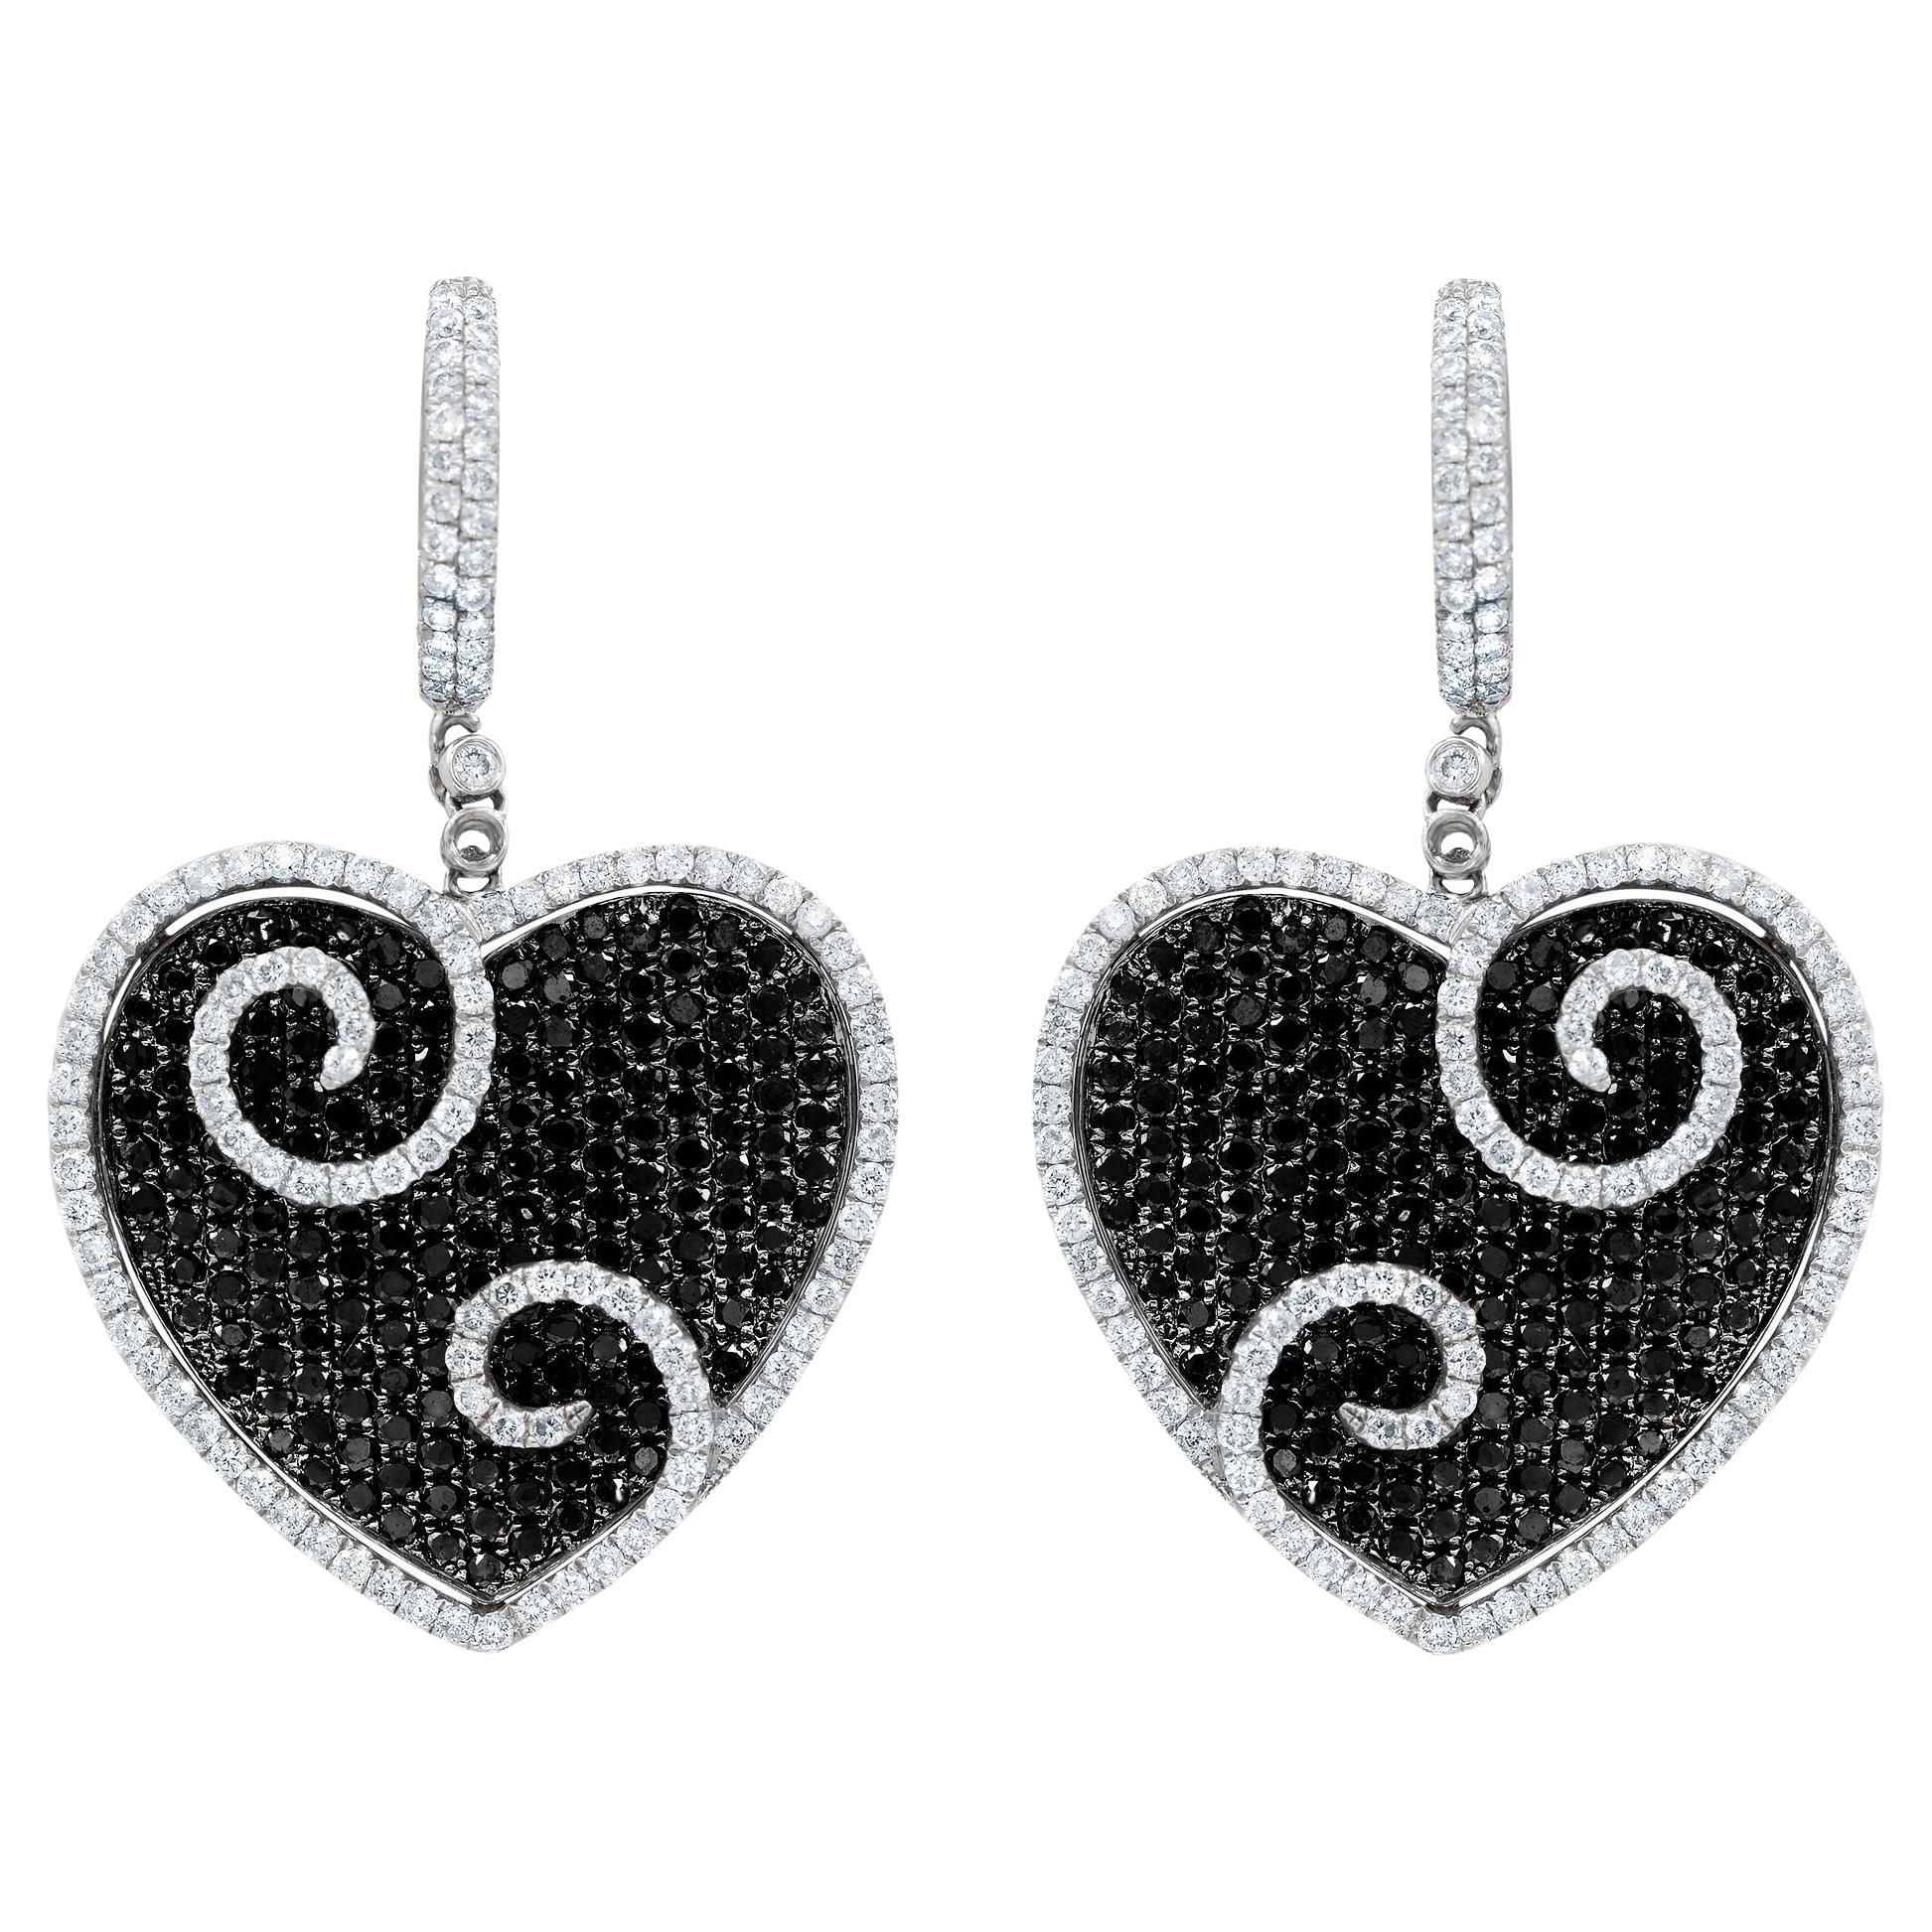 Diana M. 18 kt White Gold Diamond Heart Earrings Containing 5.23 cts  For Sale